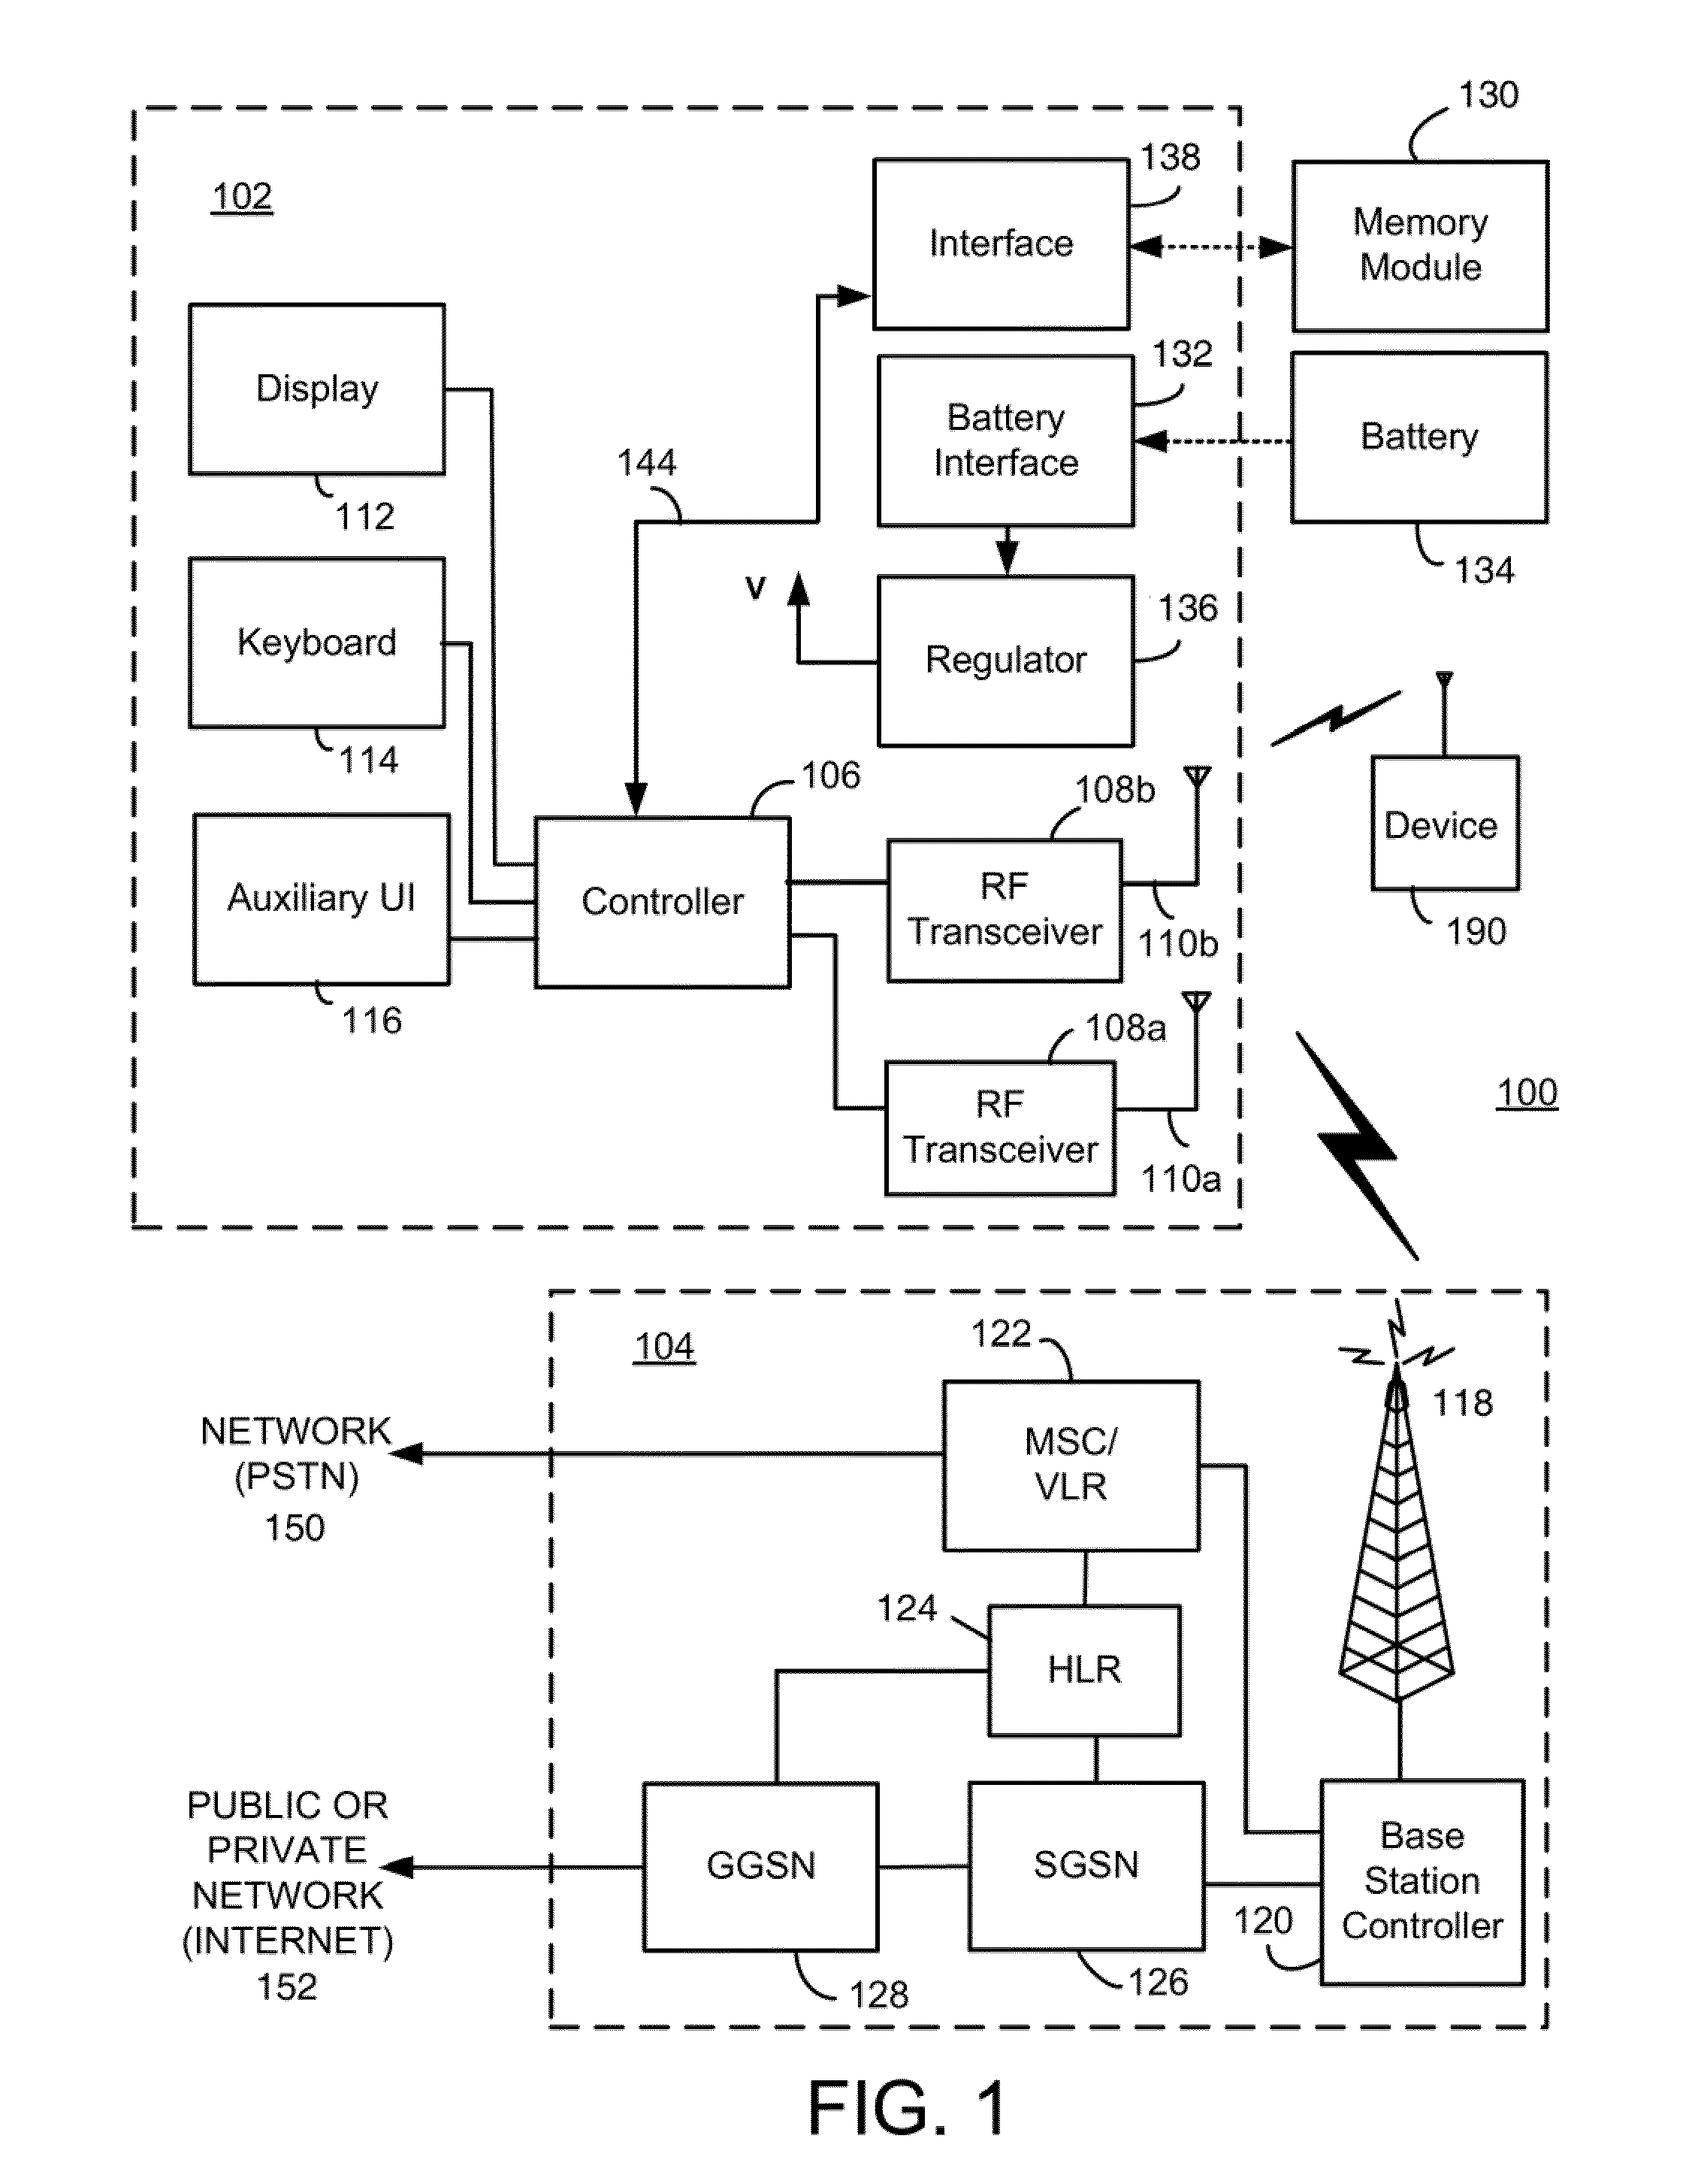 Methods And Apparatus For Use In Selectively Retrieving And Displaying User Interface Information Of A Wireless Peripheral Device